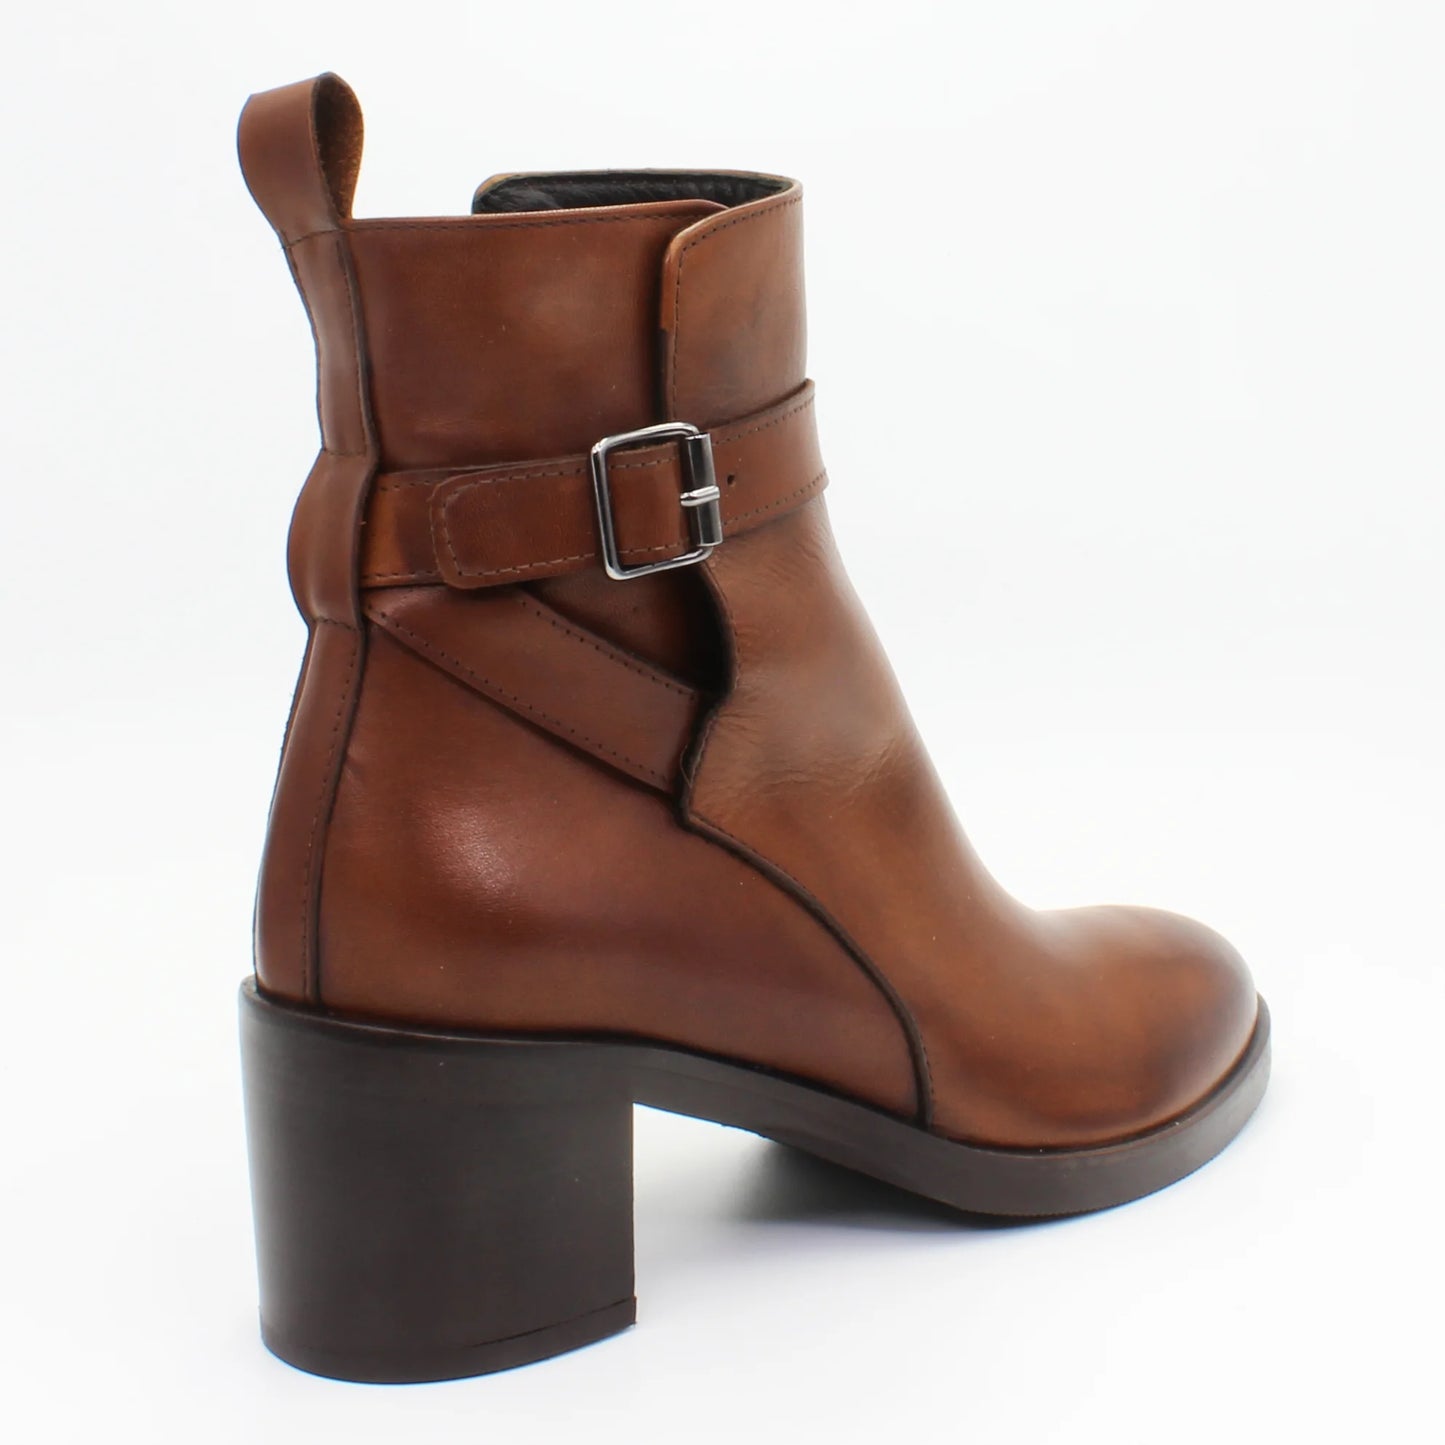 Shop Handmade Italian Leather Heeled Ankle Boot in Tabacco (GC2560) or browse our range of hand-made Italian boots for women in leather or suede in-store at Aliverti Cape Town, or shop online. We deliver in South Africa & offer multiple payment plans as well as accept multiple safe & secure payment methods.